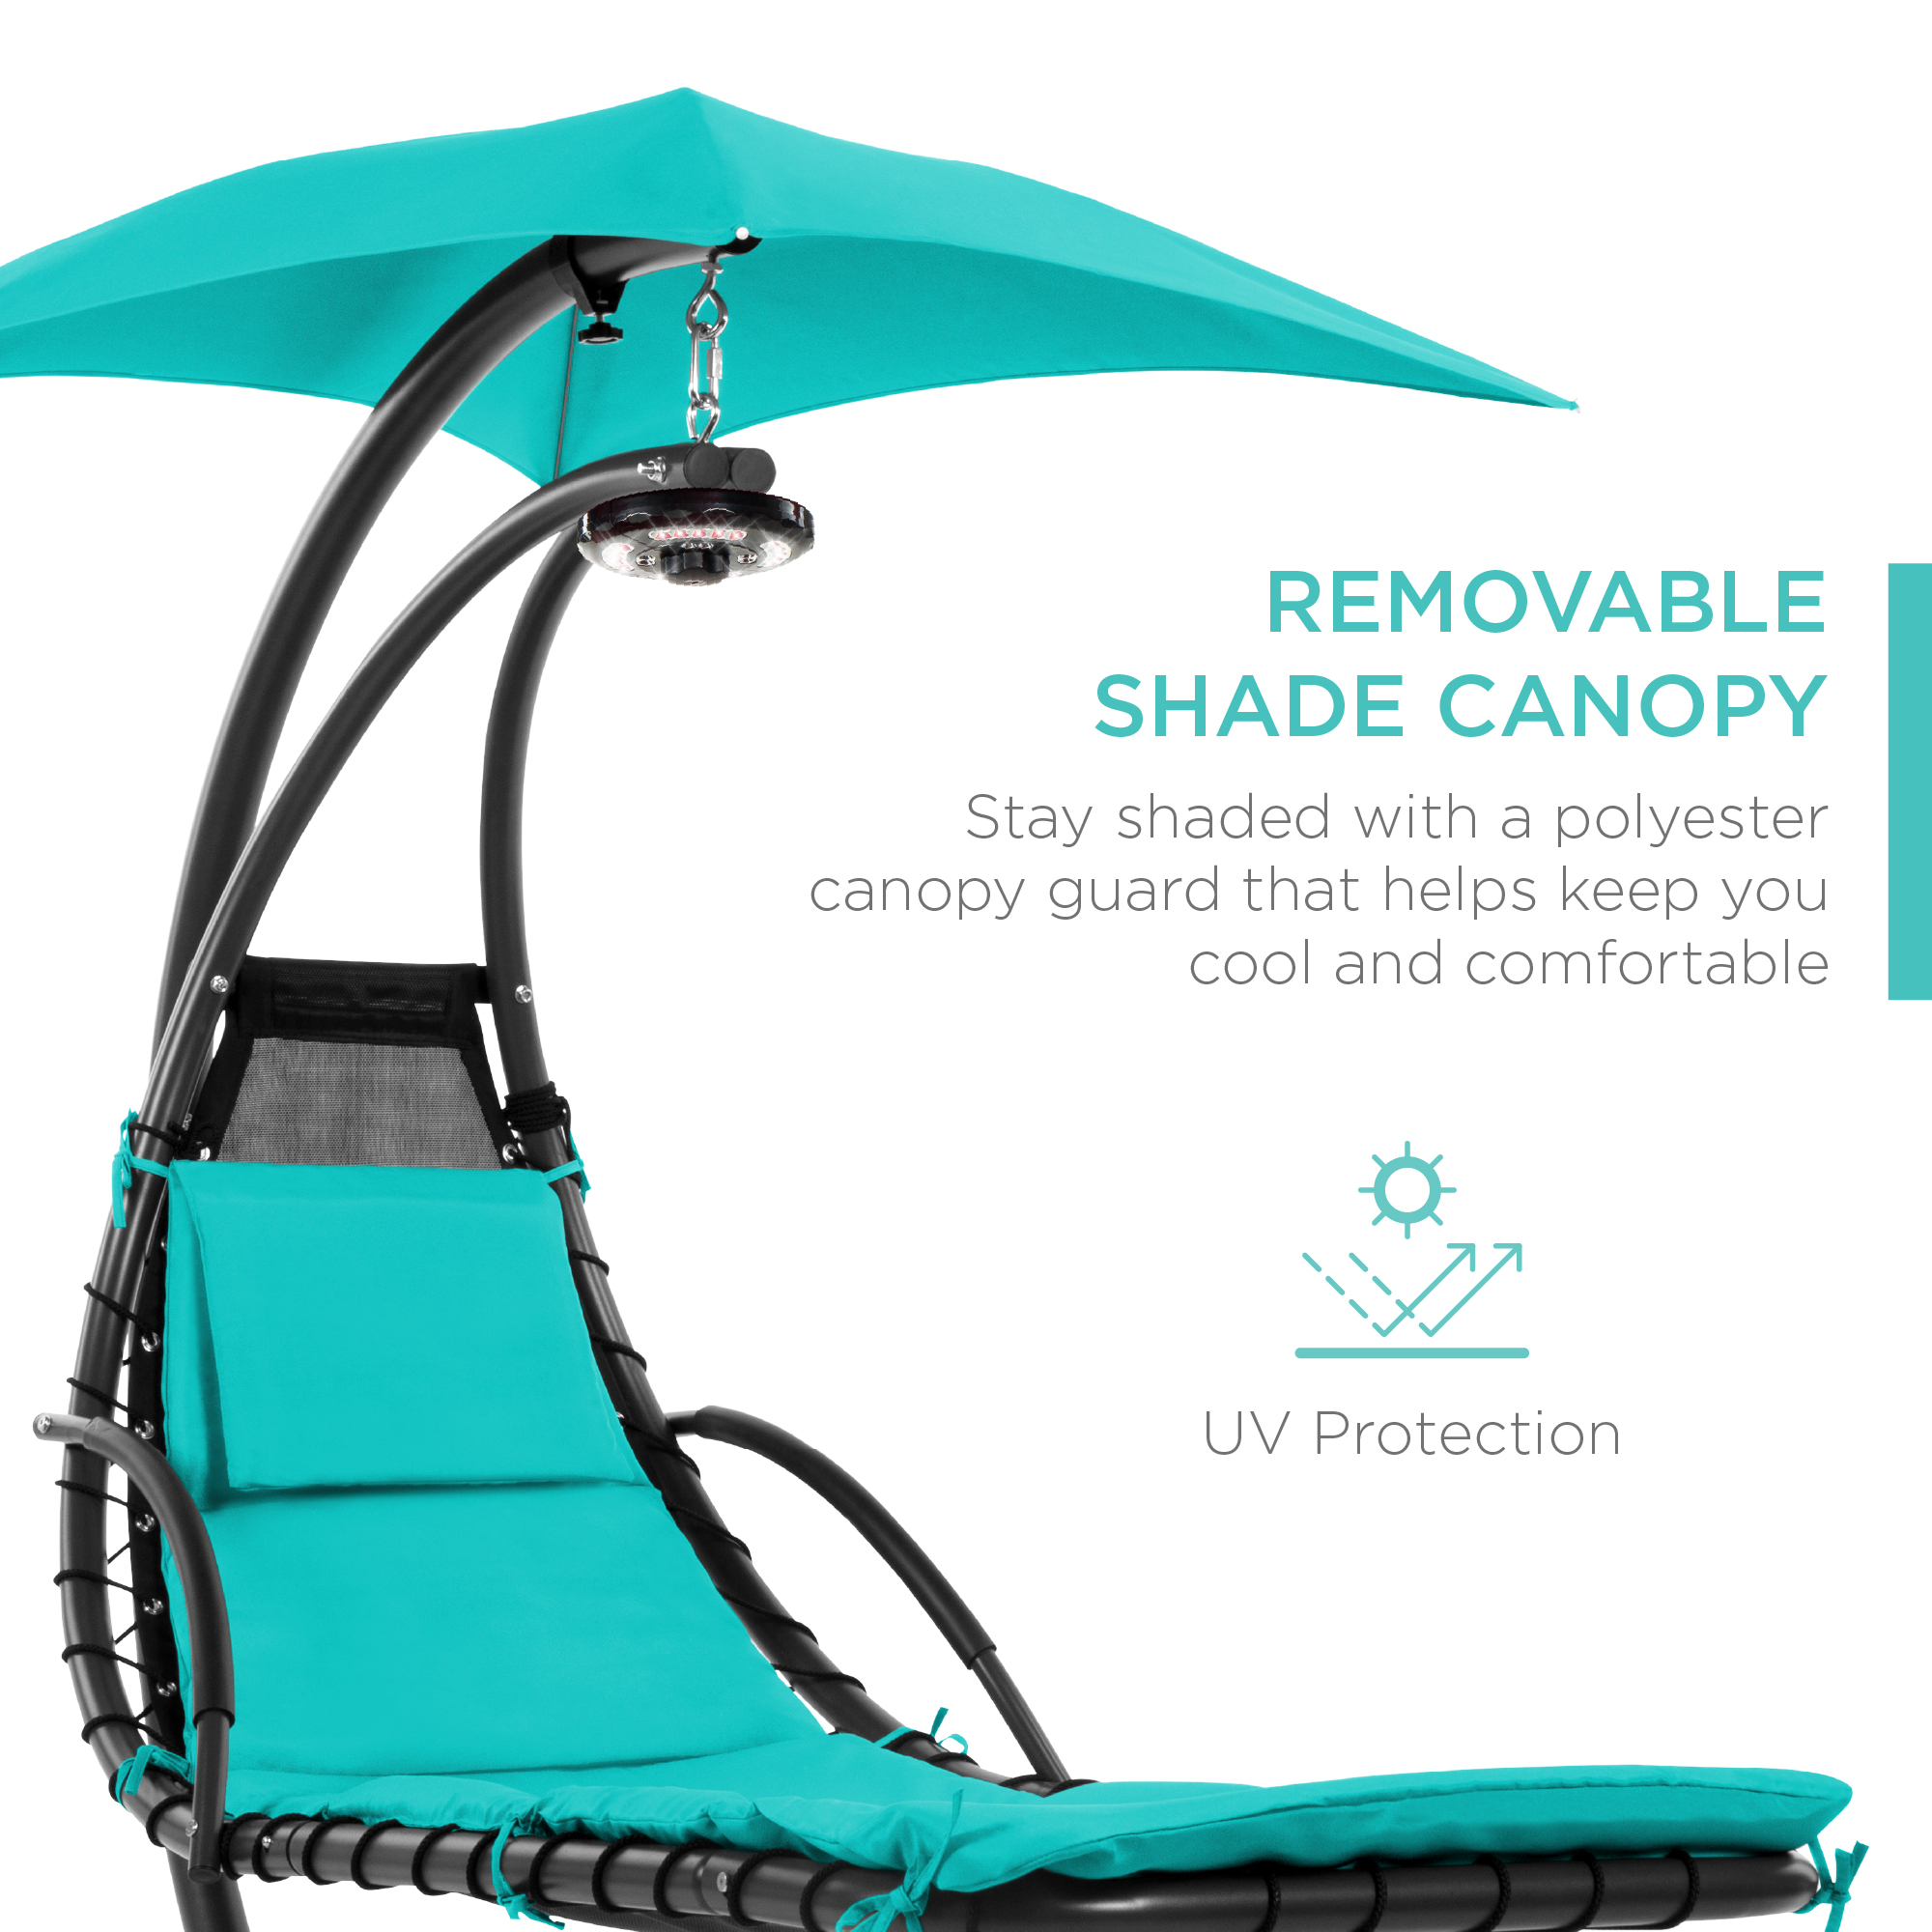 Best Choice Products Hanging LED-Lit Curved Chaise Lounge Chair for Backyard, Patio w/ Pillow, Canopy, Stand - Teal - image 4 of 7